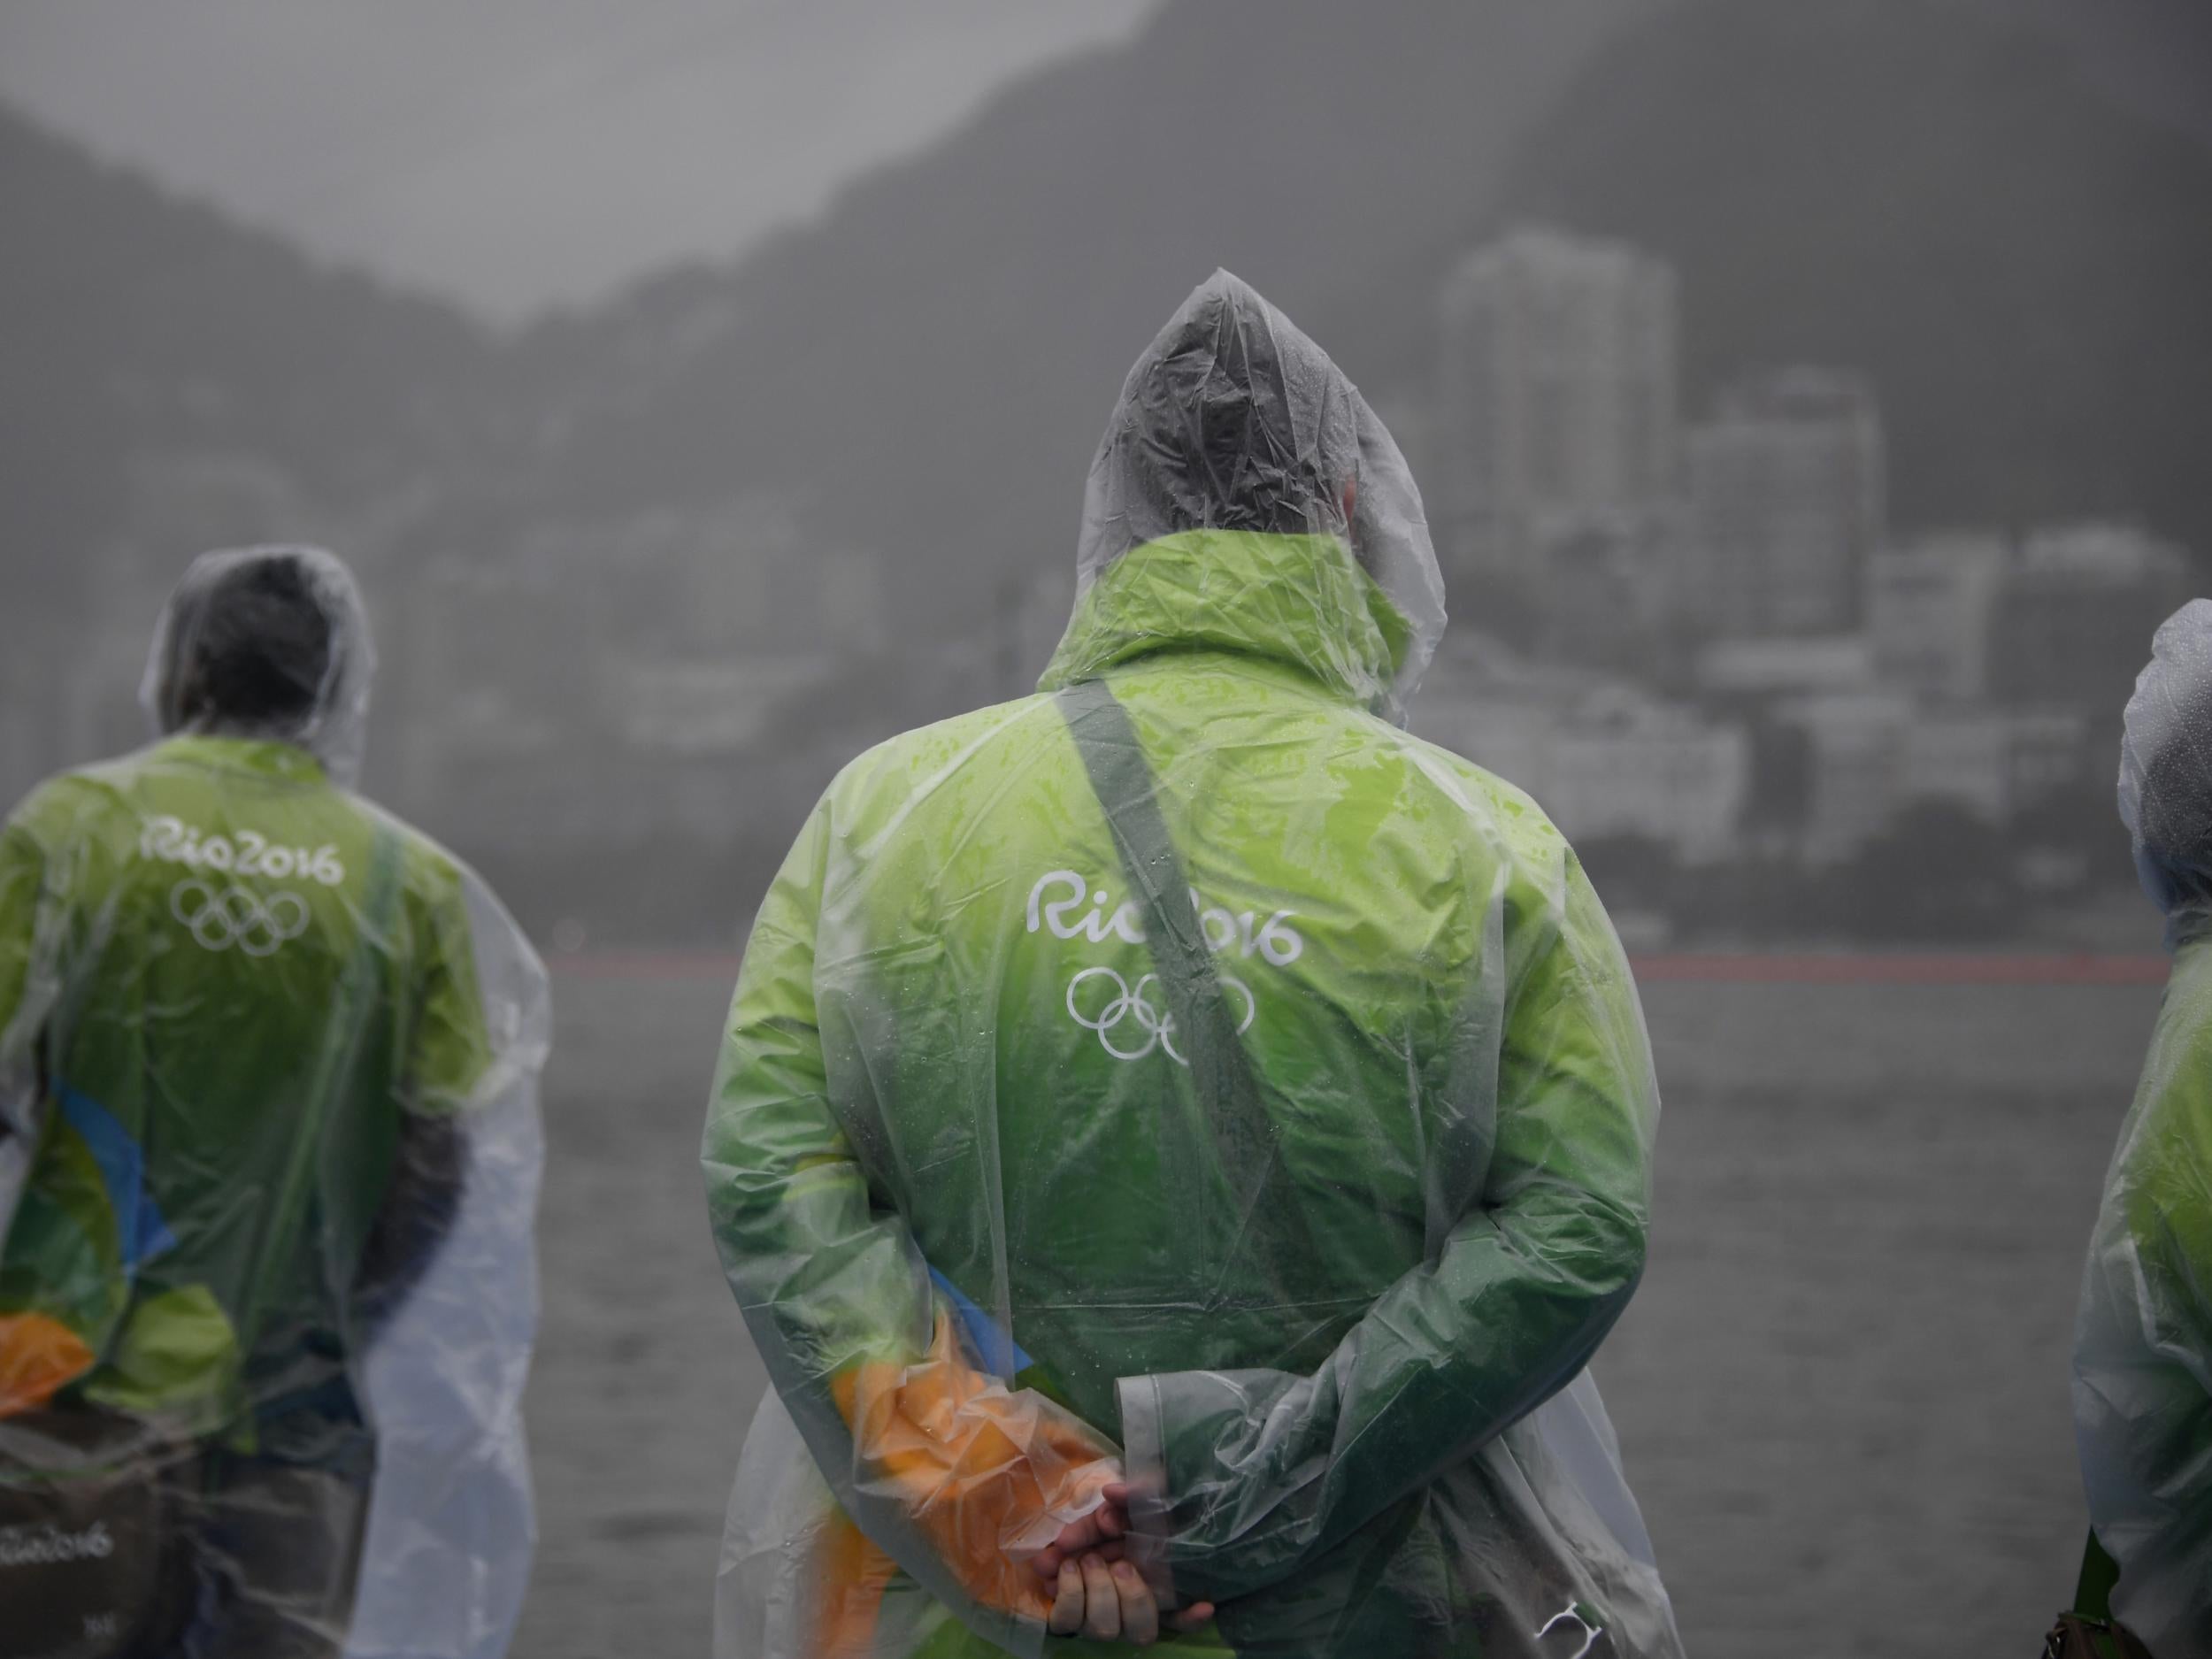 Volunteers wearing raincoats stand at the Lagoa stadium during the Rio 2016 Olympic Games